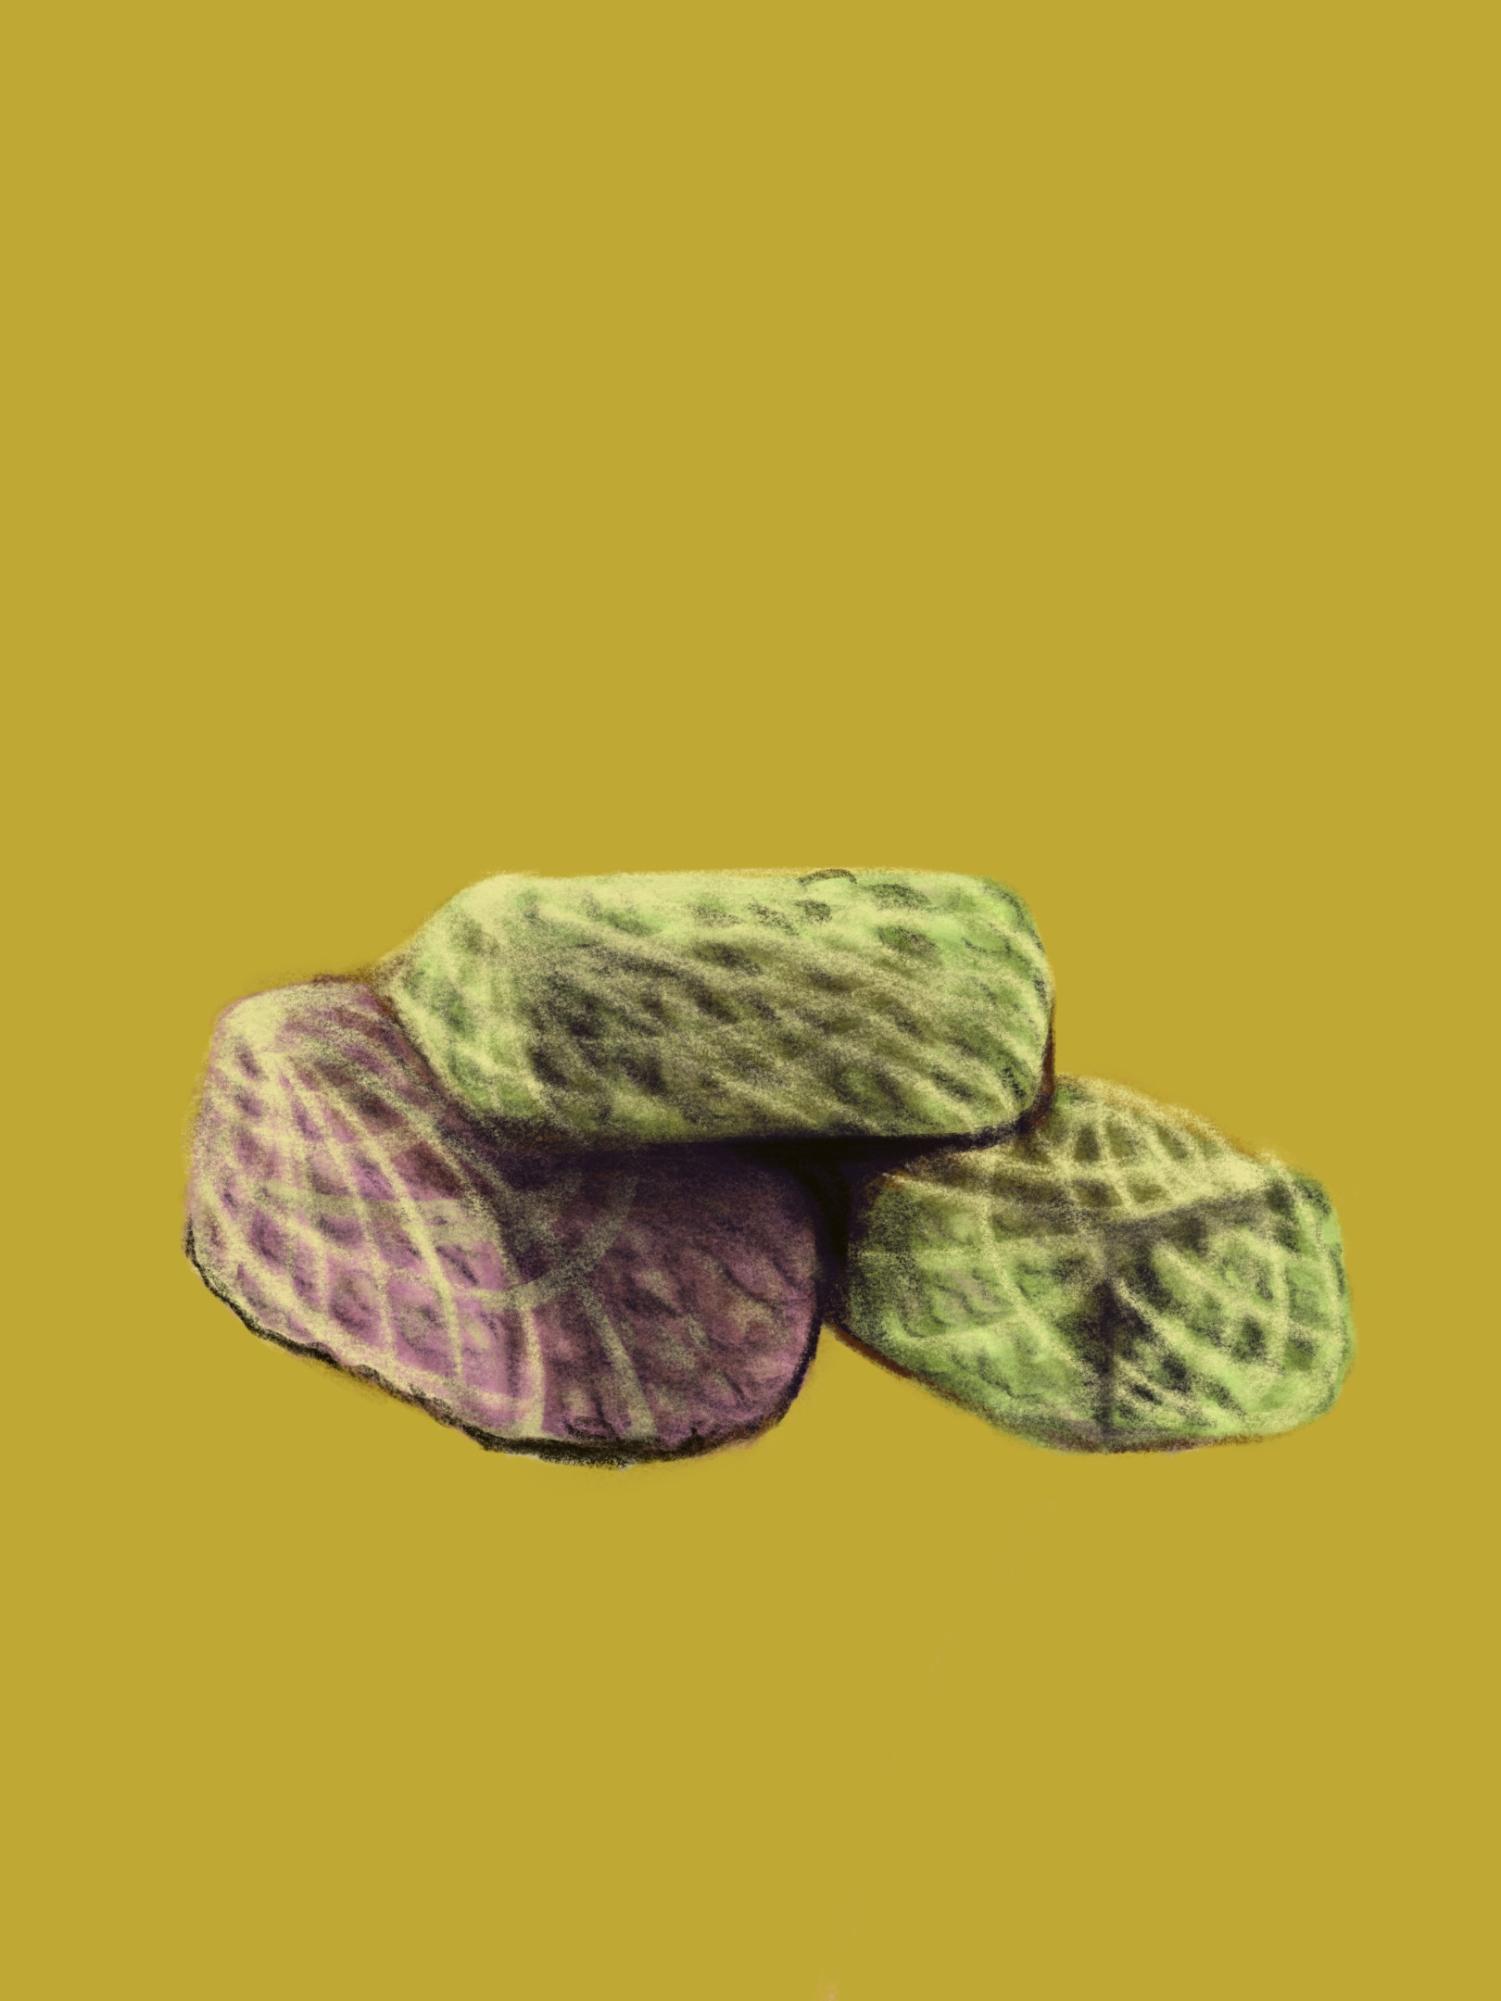 An illustration of purple and green rice crispy treats with web patterns in front of a yellow background.